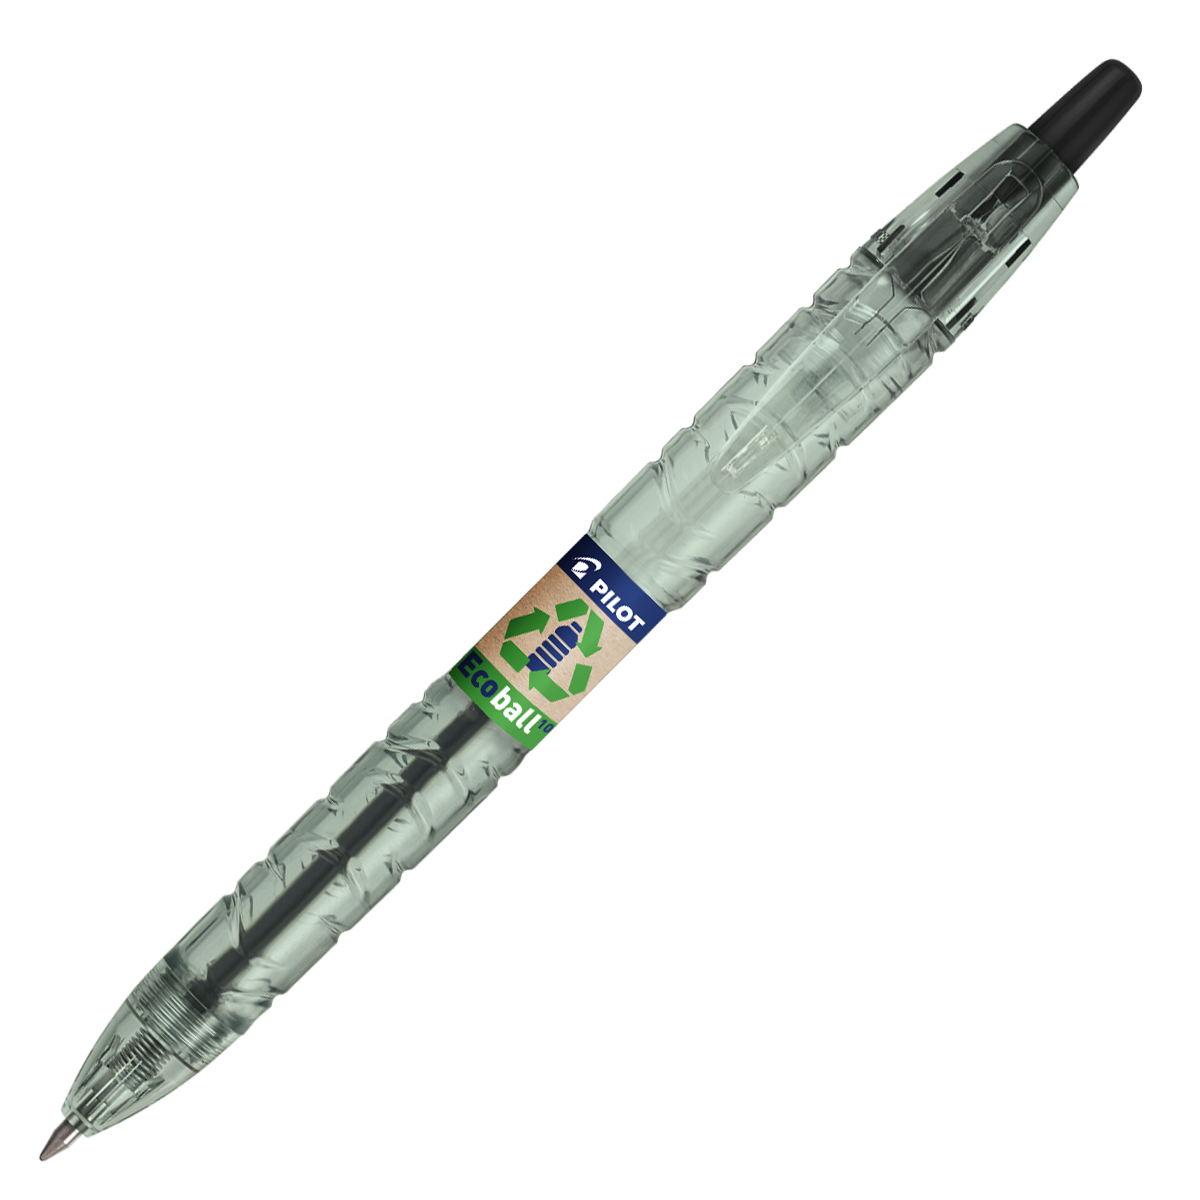 Ecobal Ballpoint B2P Black in the group Pens / Writing / Ballpoints at Pen Store (127737)